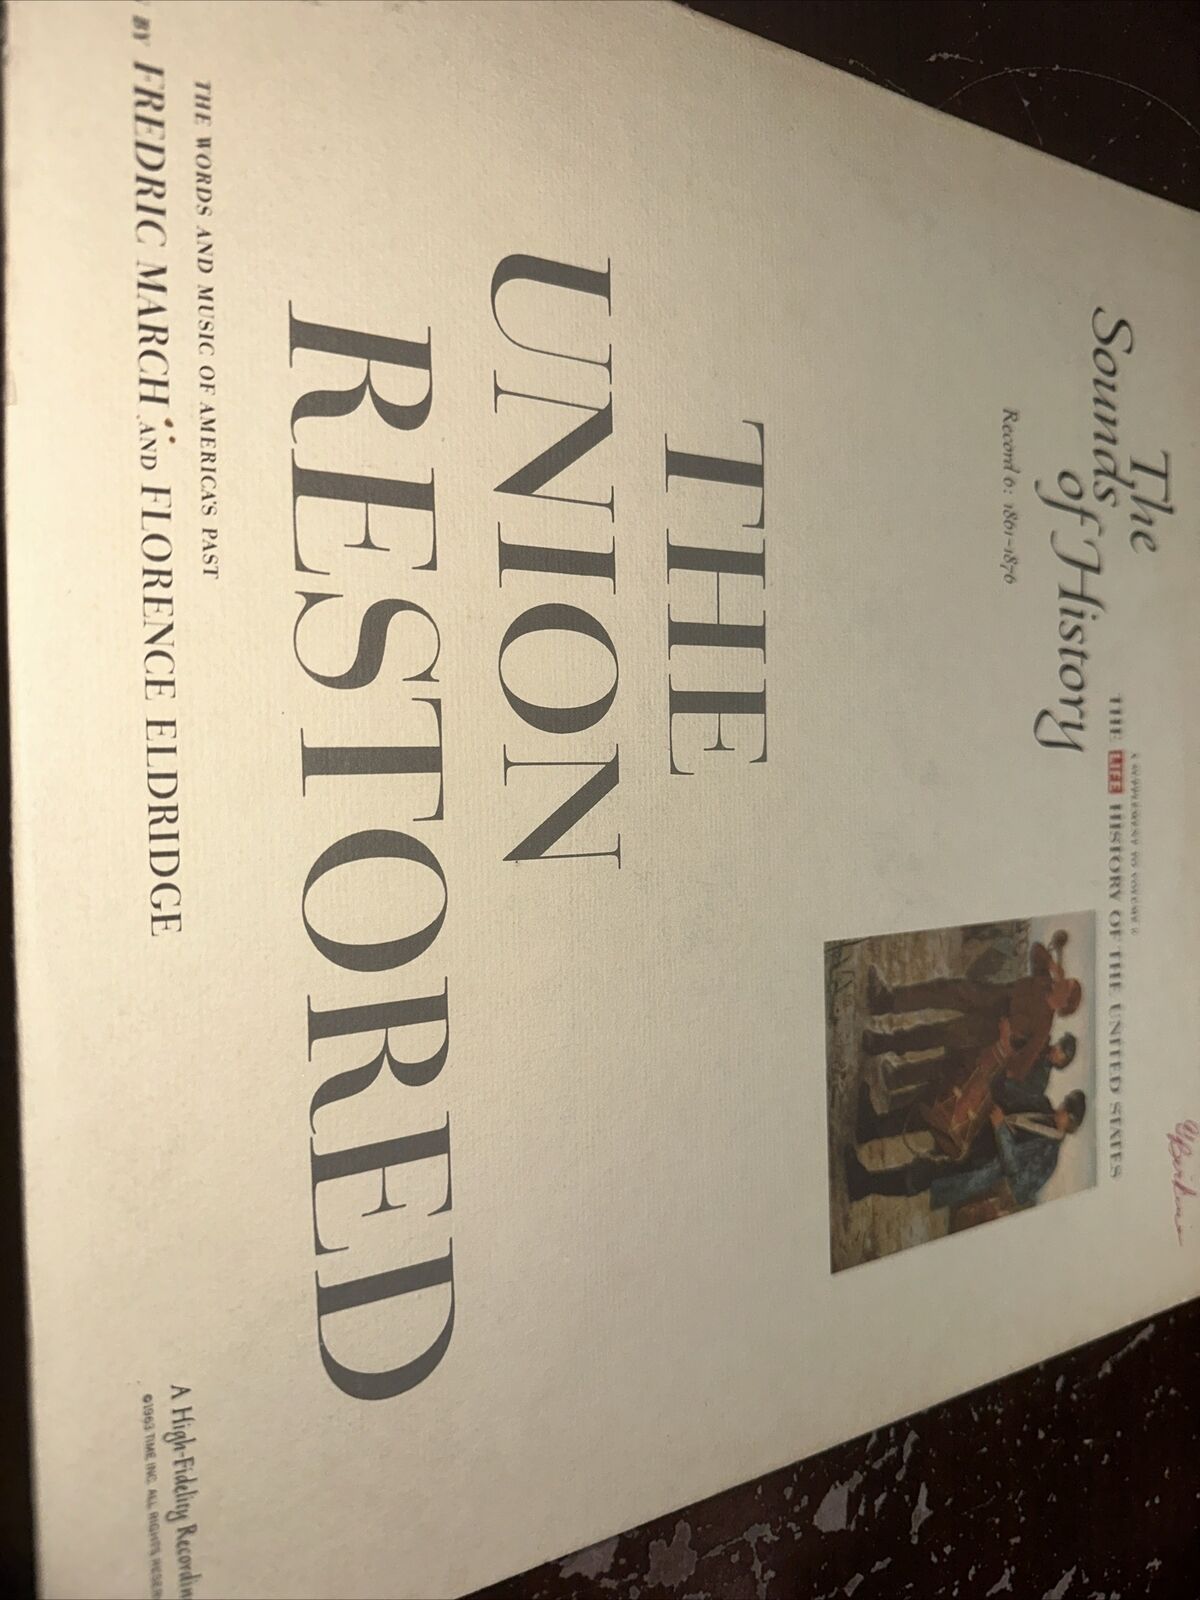 The Union Restored LIFE Sounds of History - Vintage Vinyl Record